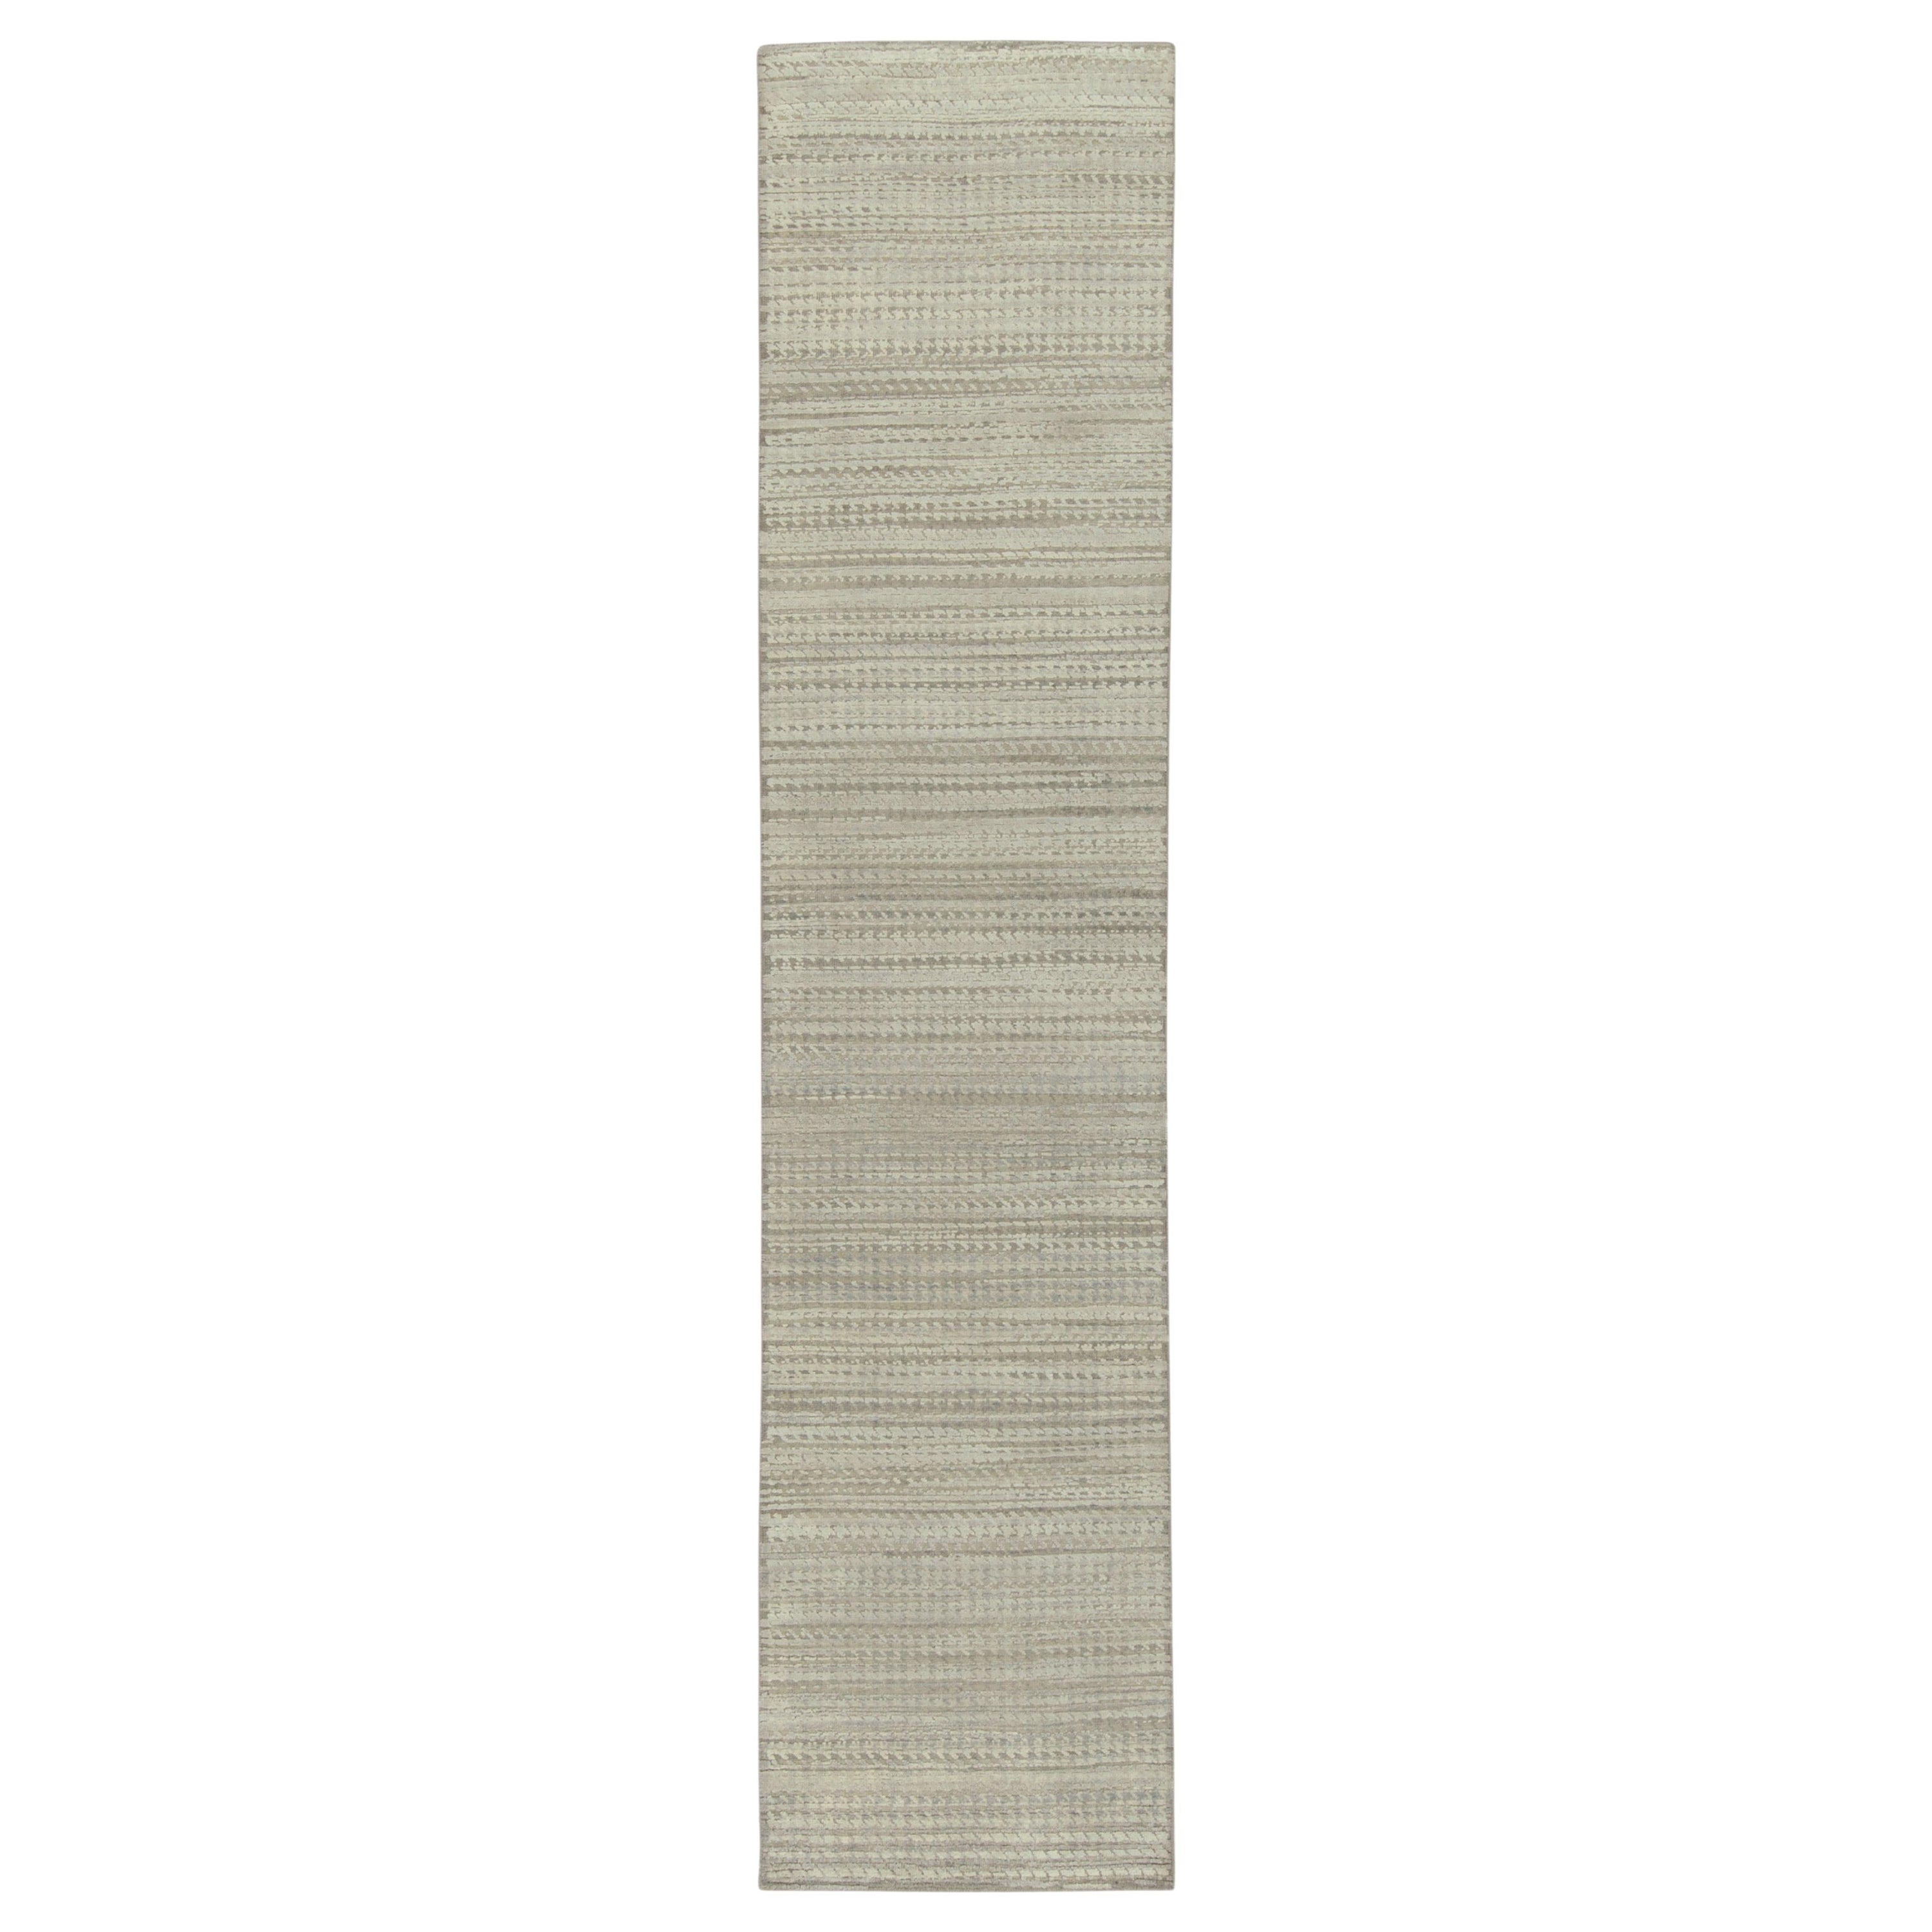 Rug & Kilim’s Contemporary runner in Gray & White High-Low Geometric Pattern For Sale